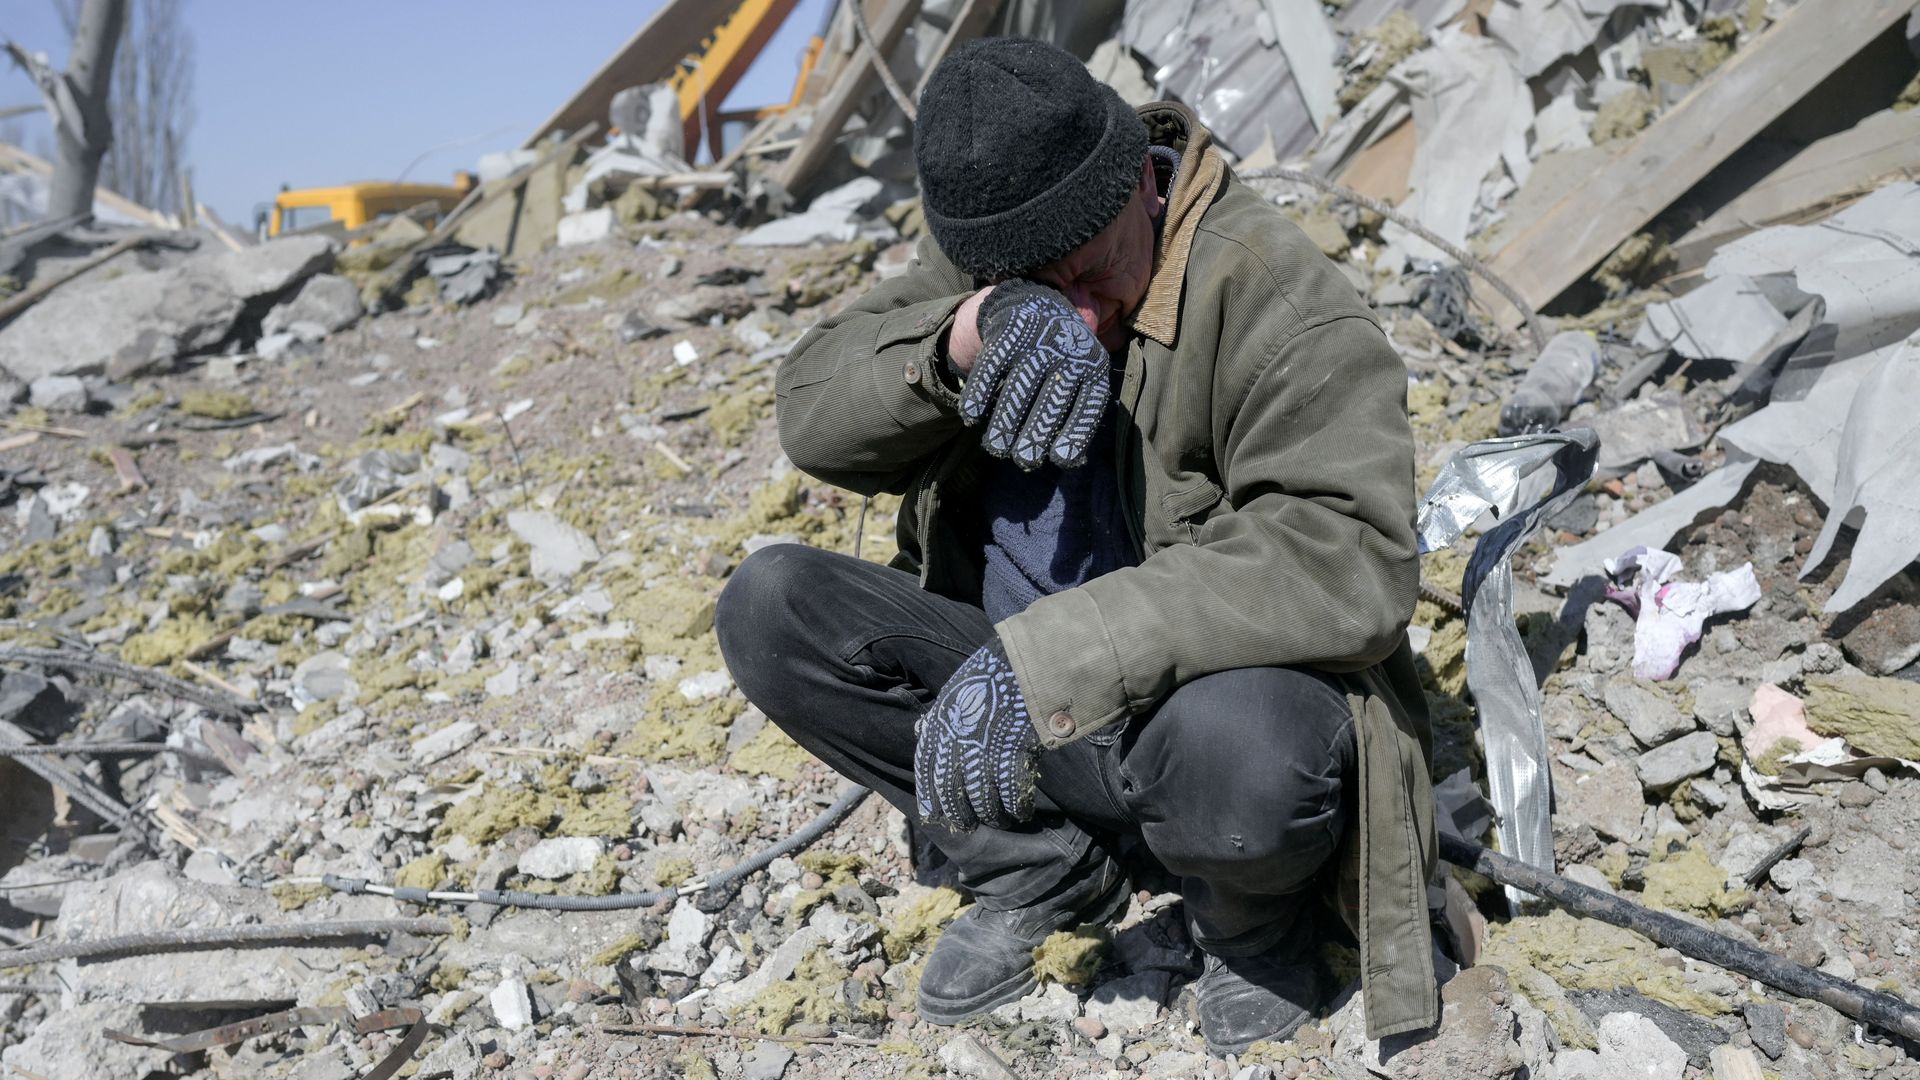 A person is crying surrounded by rubble